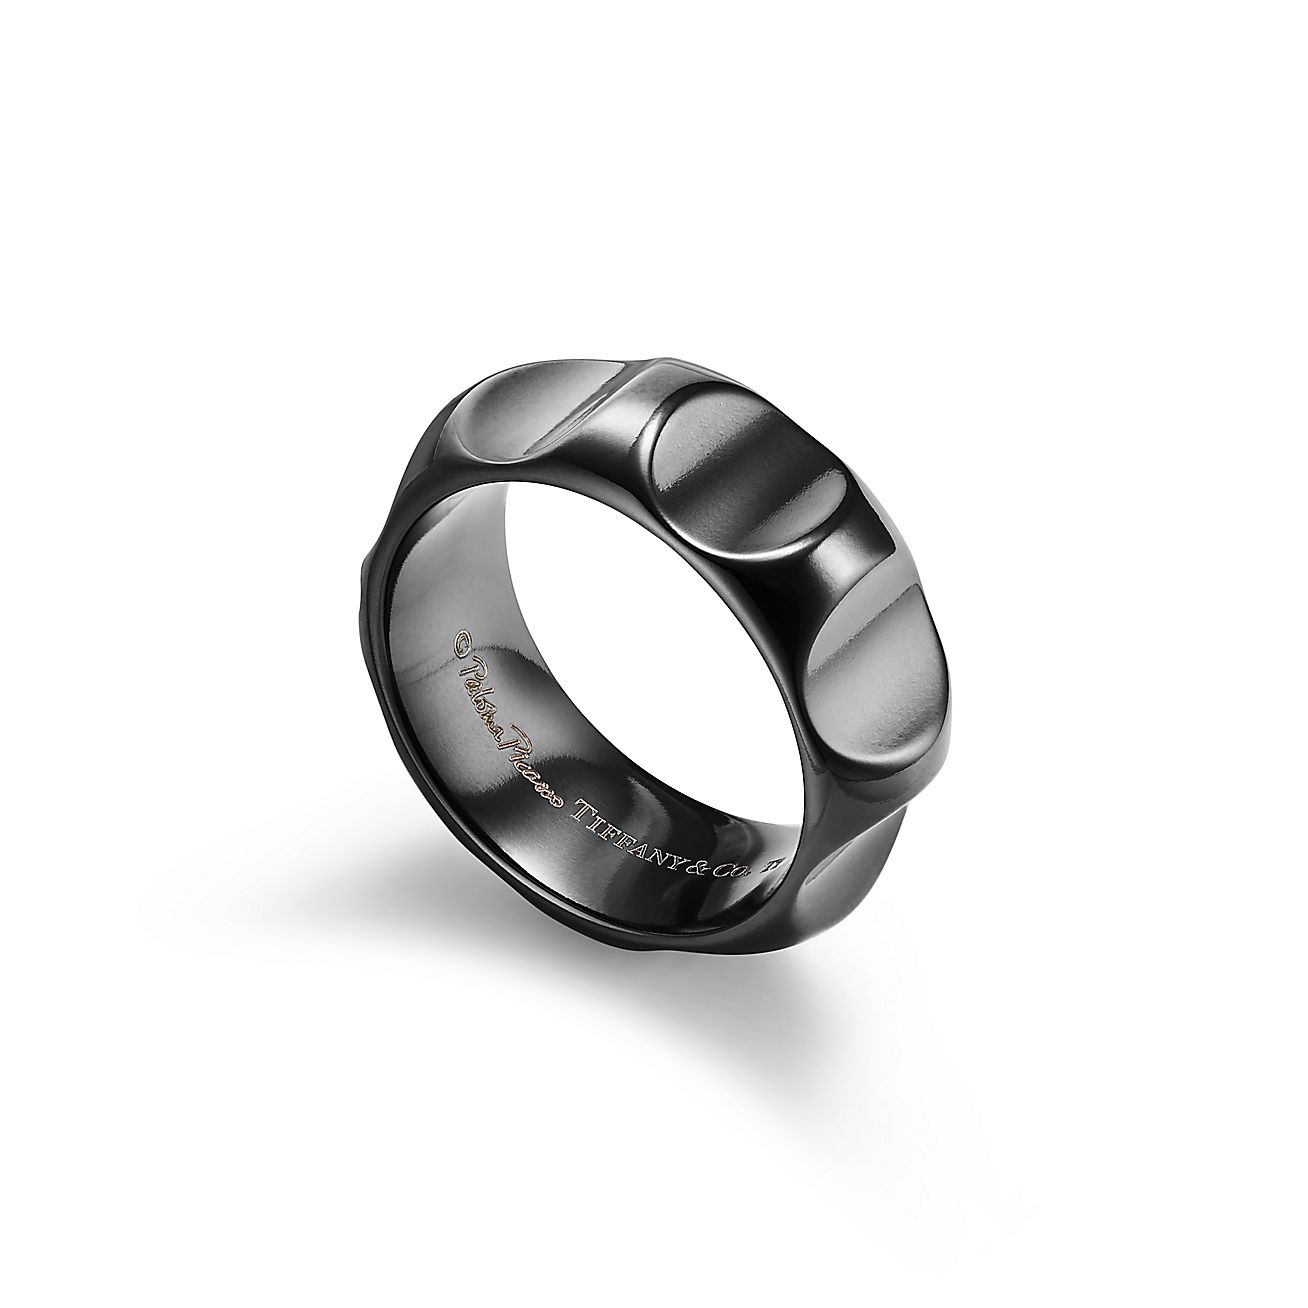 Hechting Brein Minst Paloma's Groove wide ring in titanium, 9 mm wide. | Tiffany & Co.